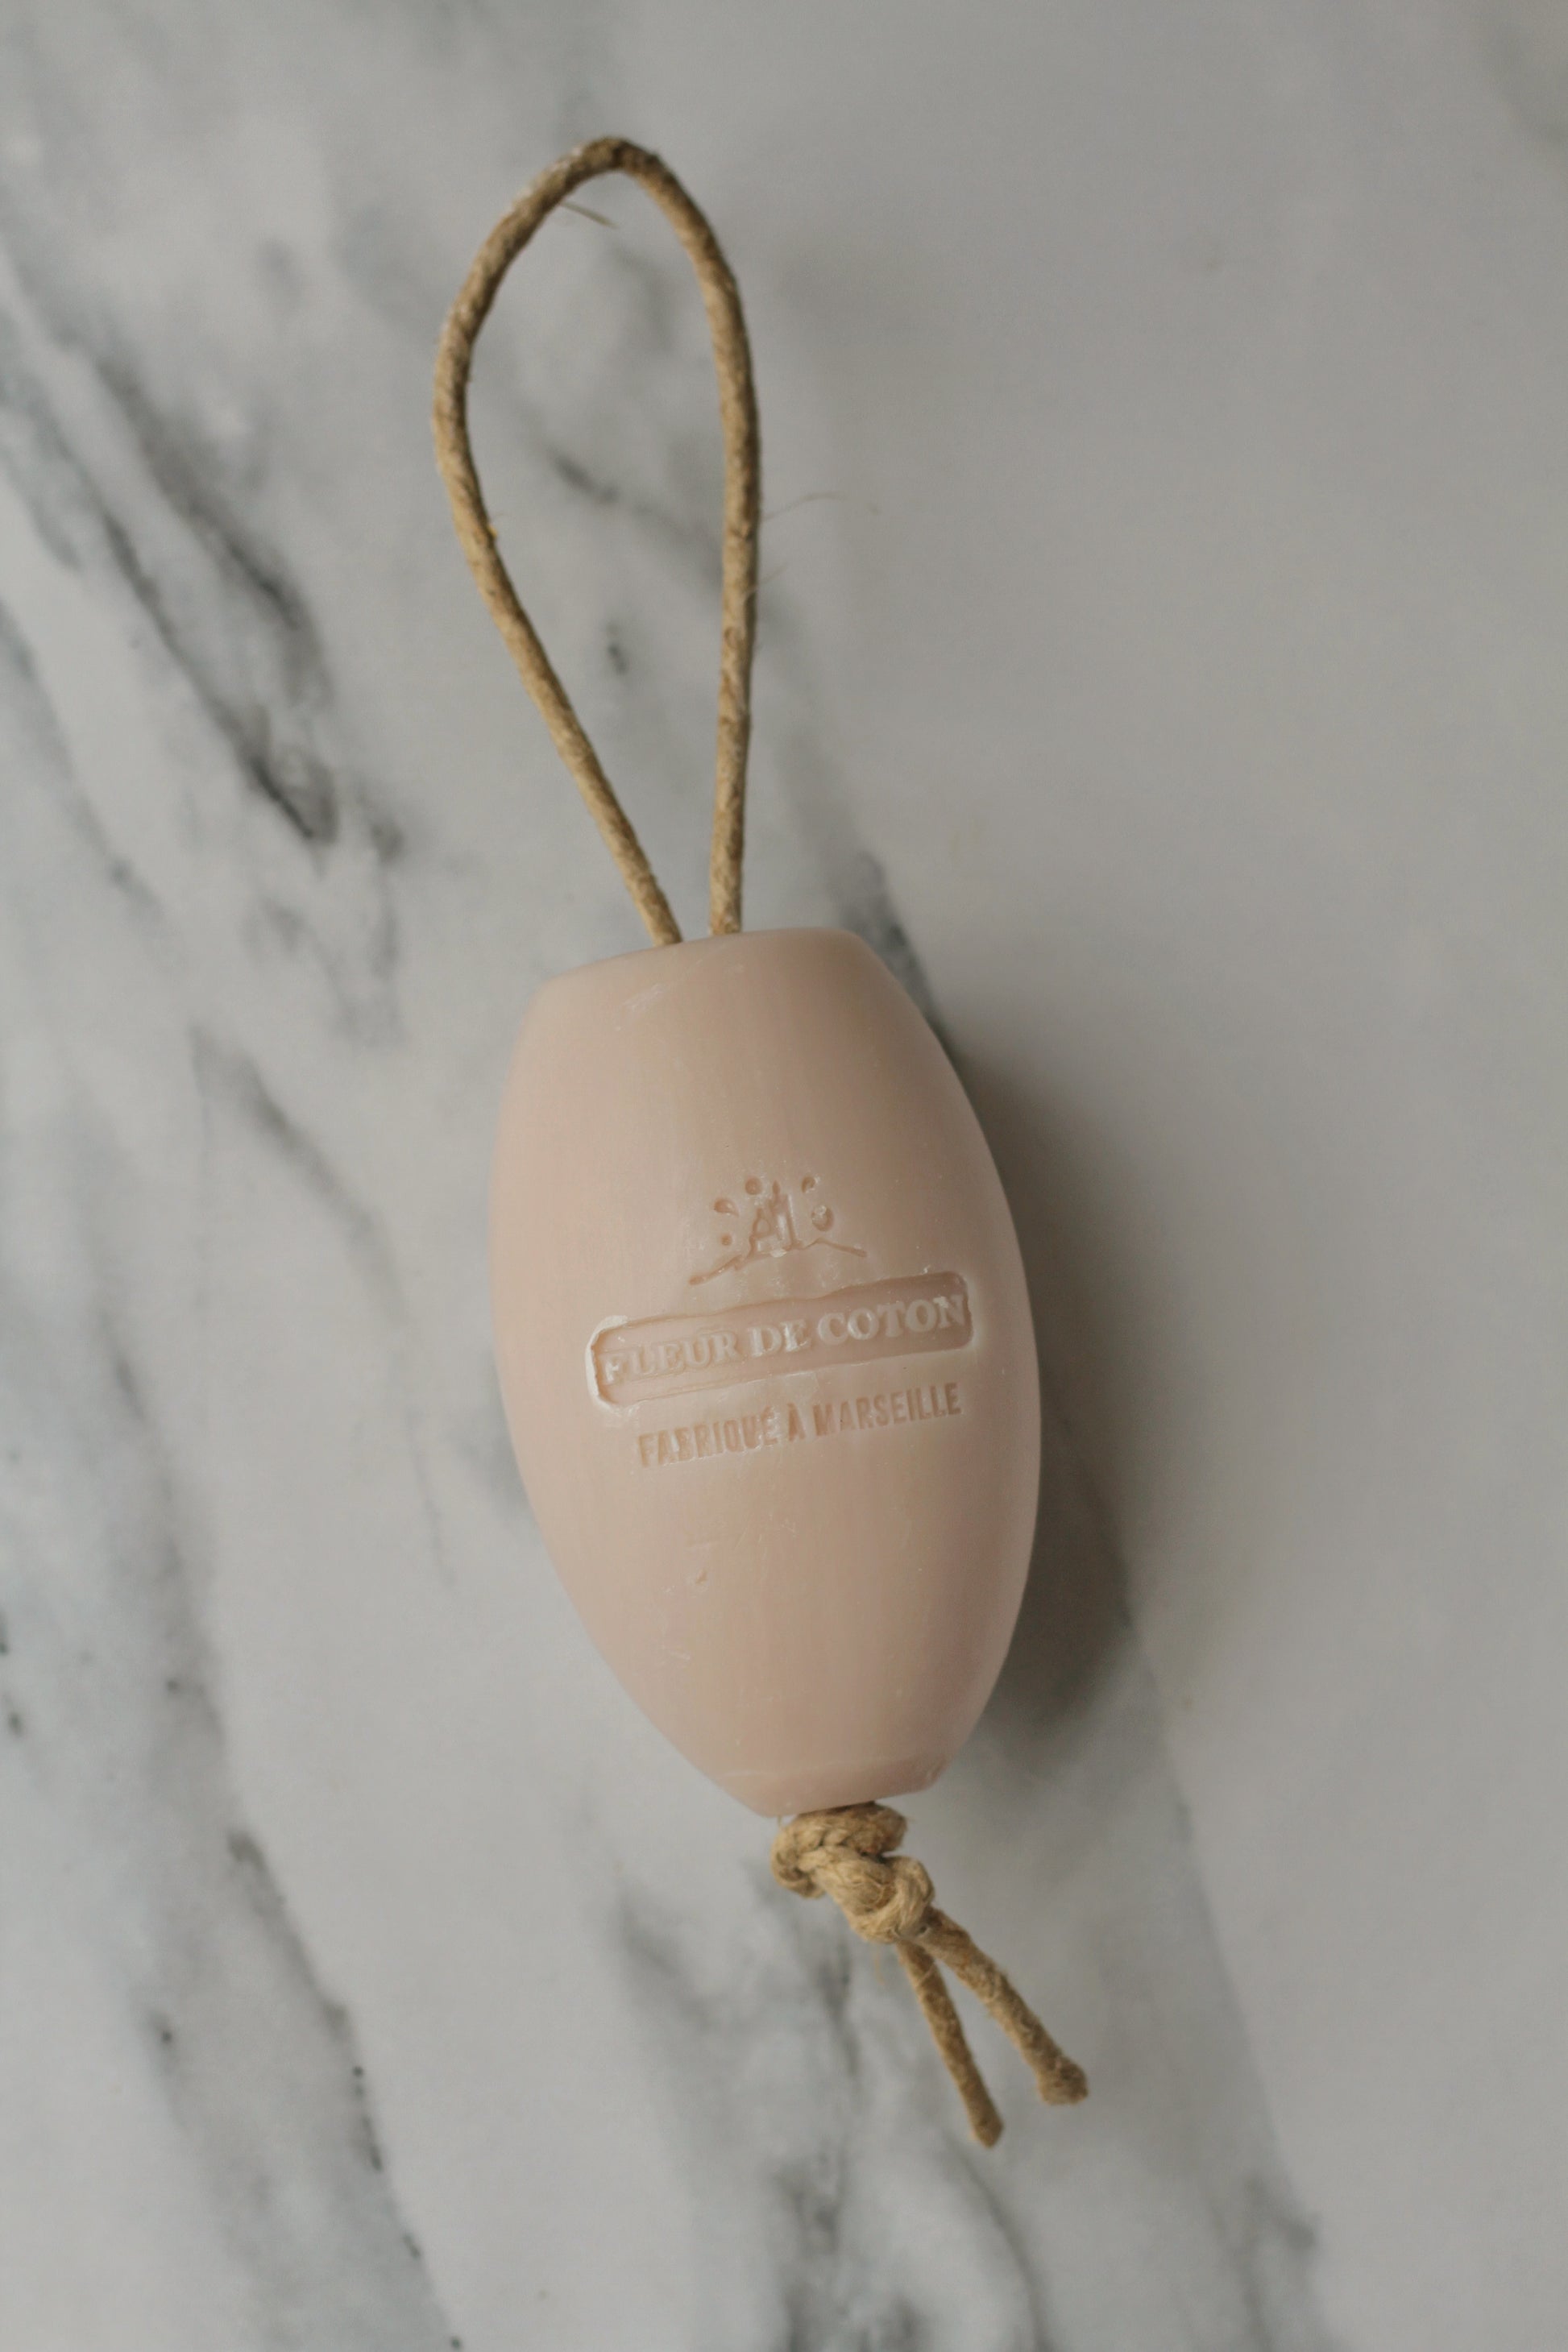 cotton scented soap on a rope, made in france.